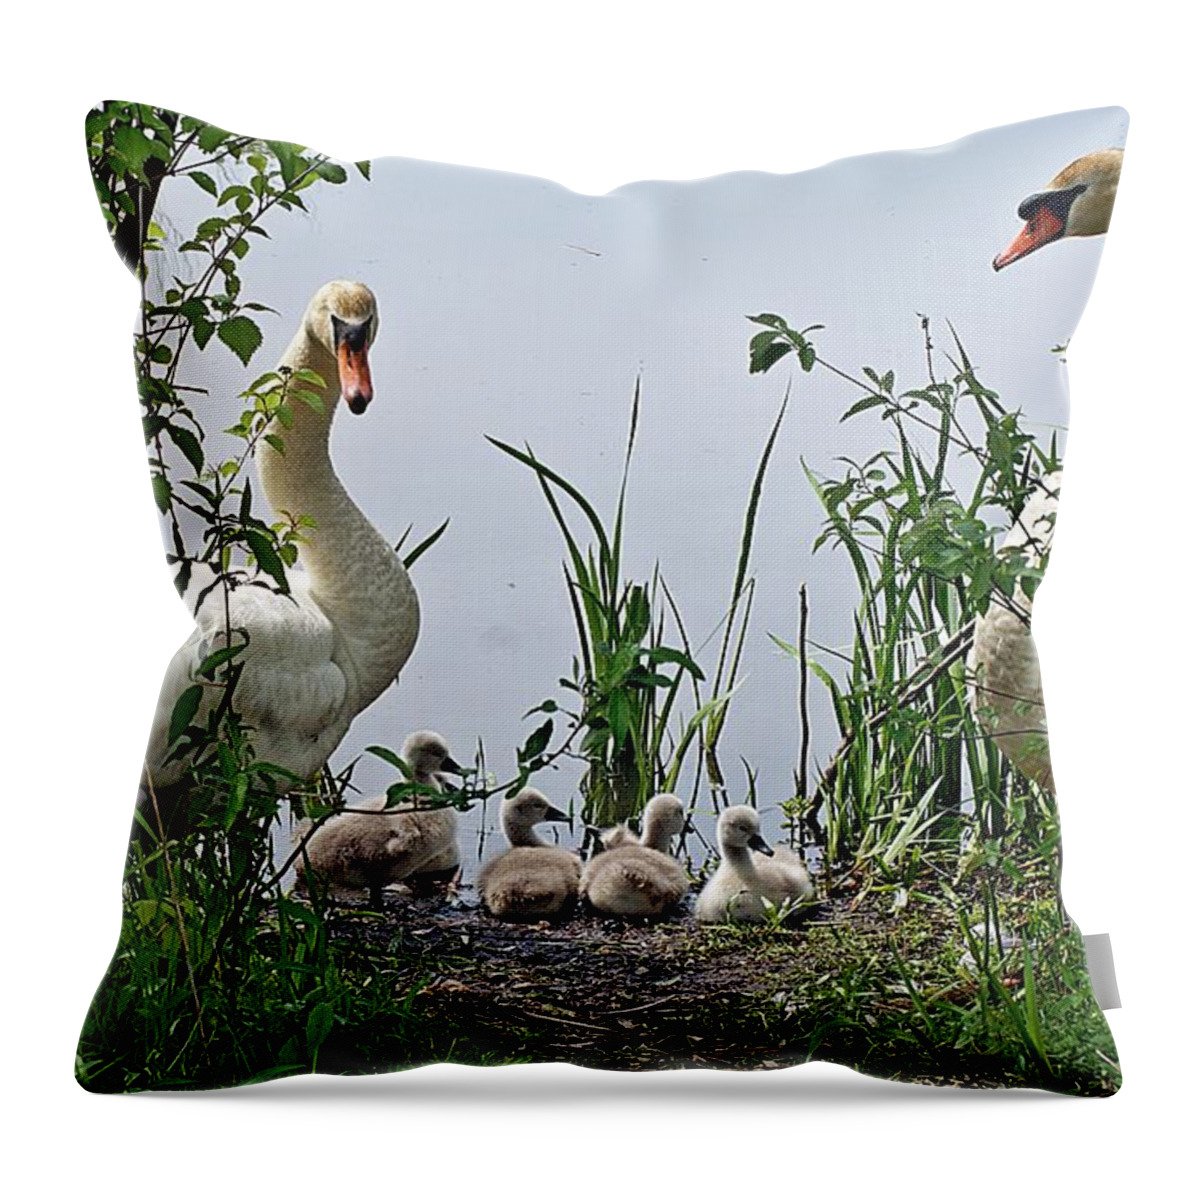 Horn Pond Throw Pillow featuring the photograph Protective Parents by Joe Faherty